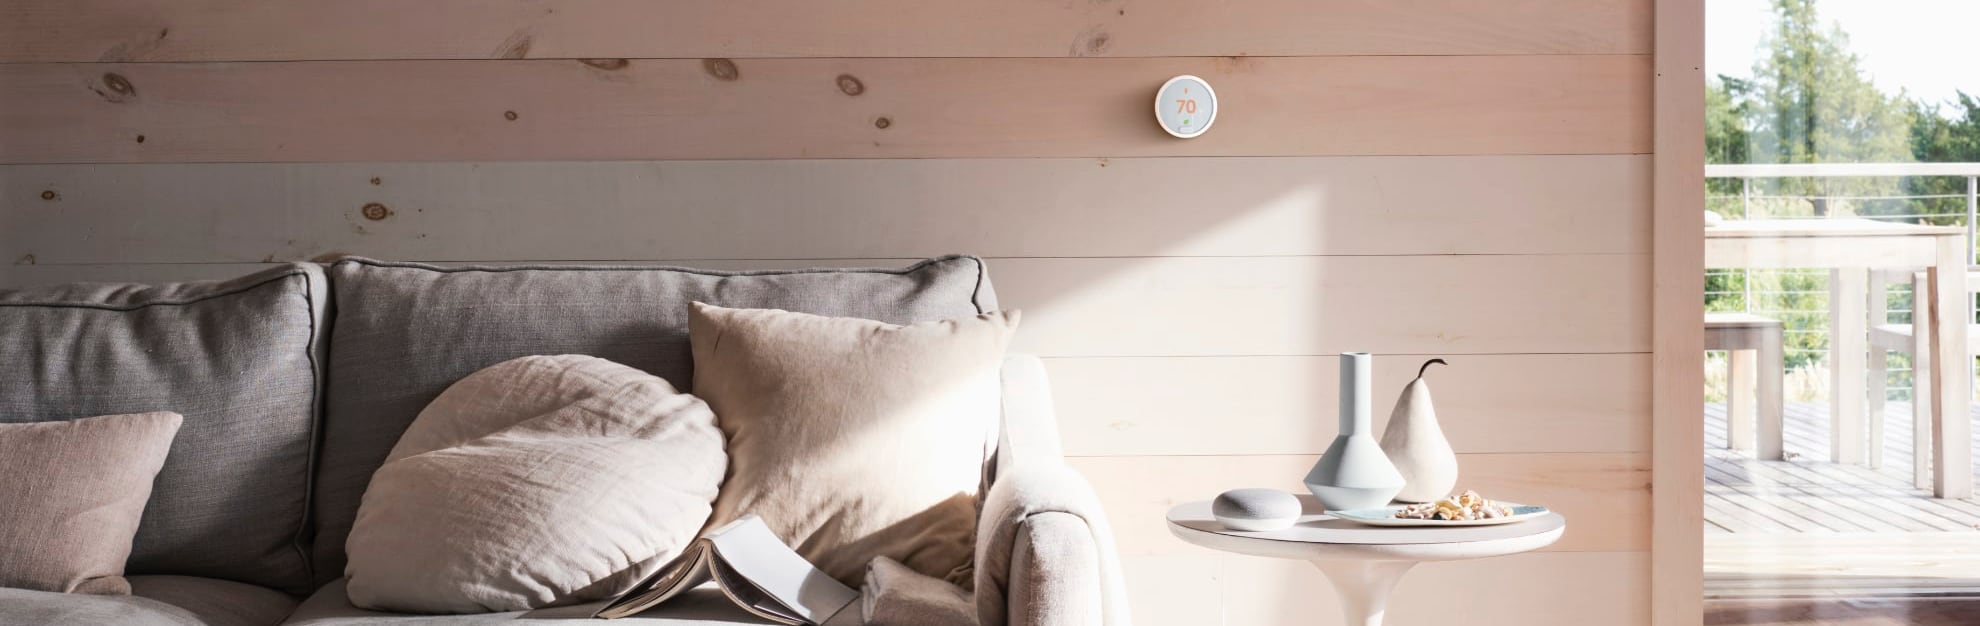 Vivint Home Automation in Dover